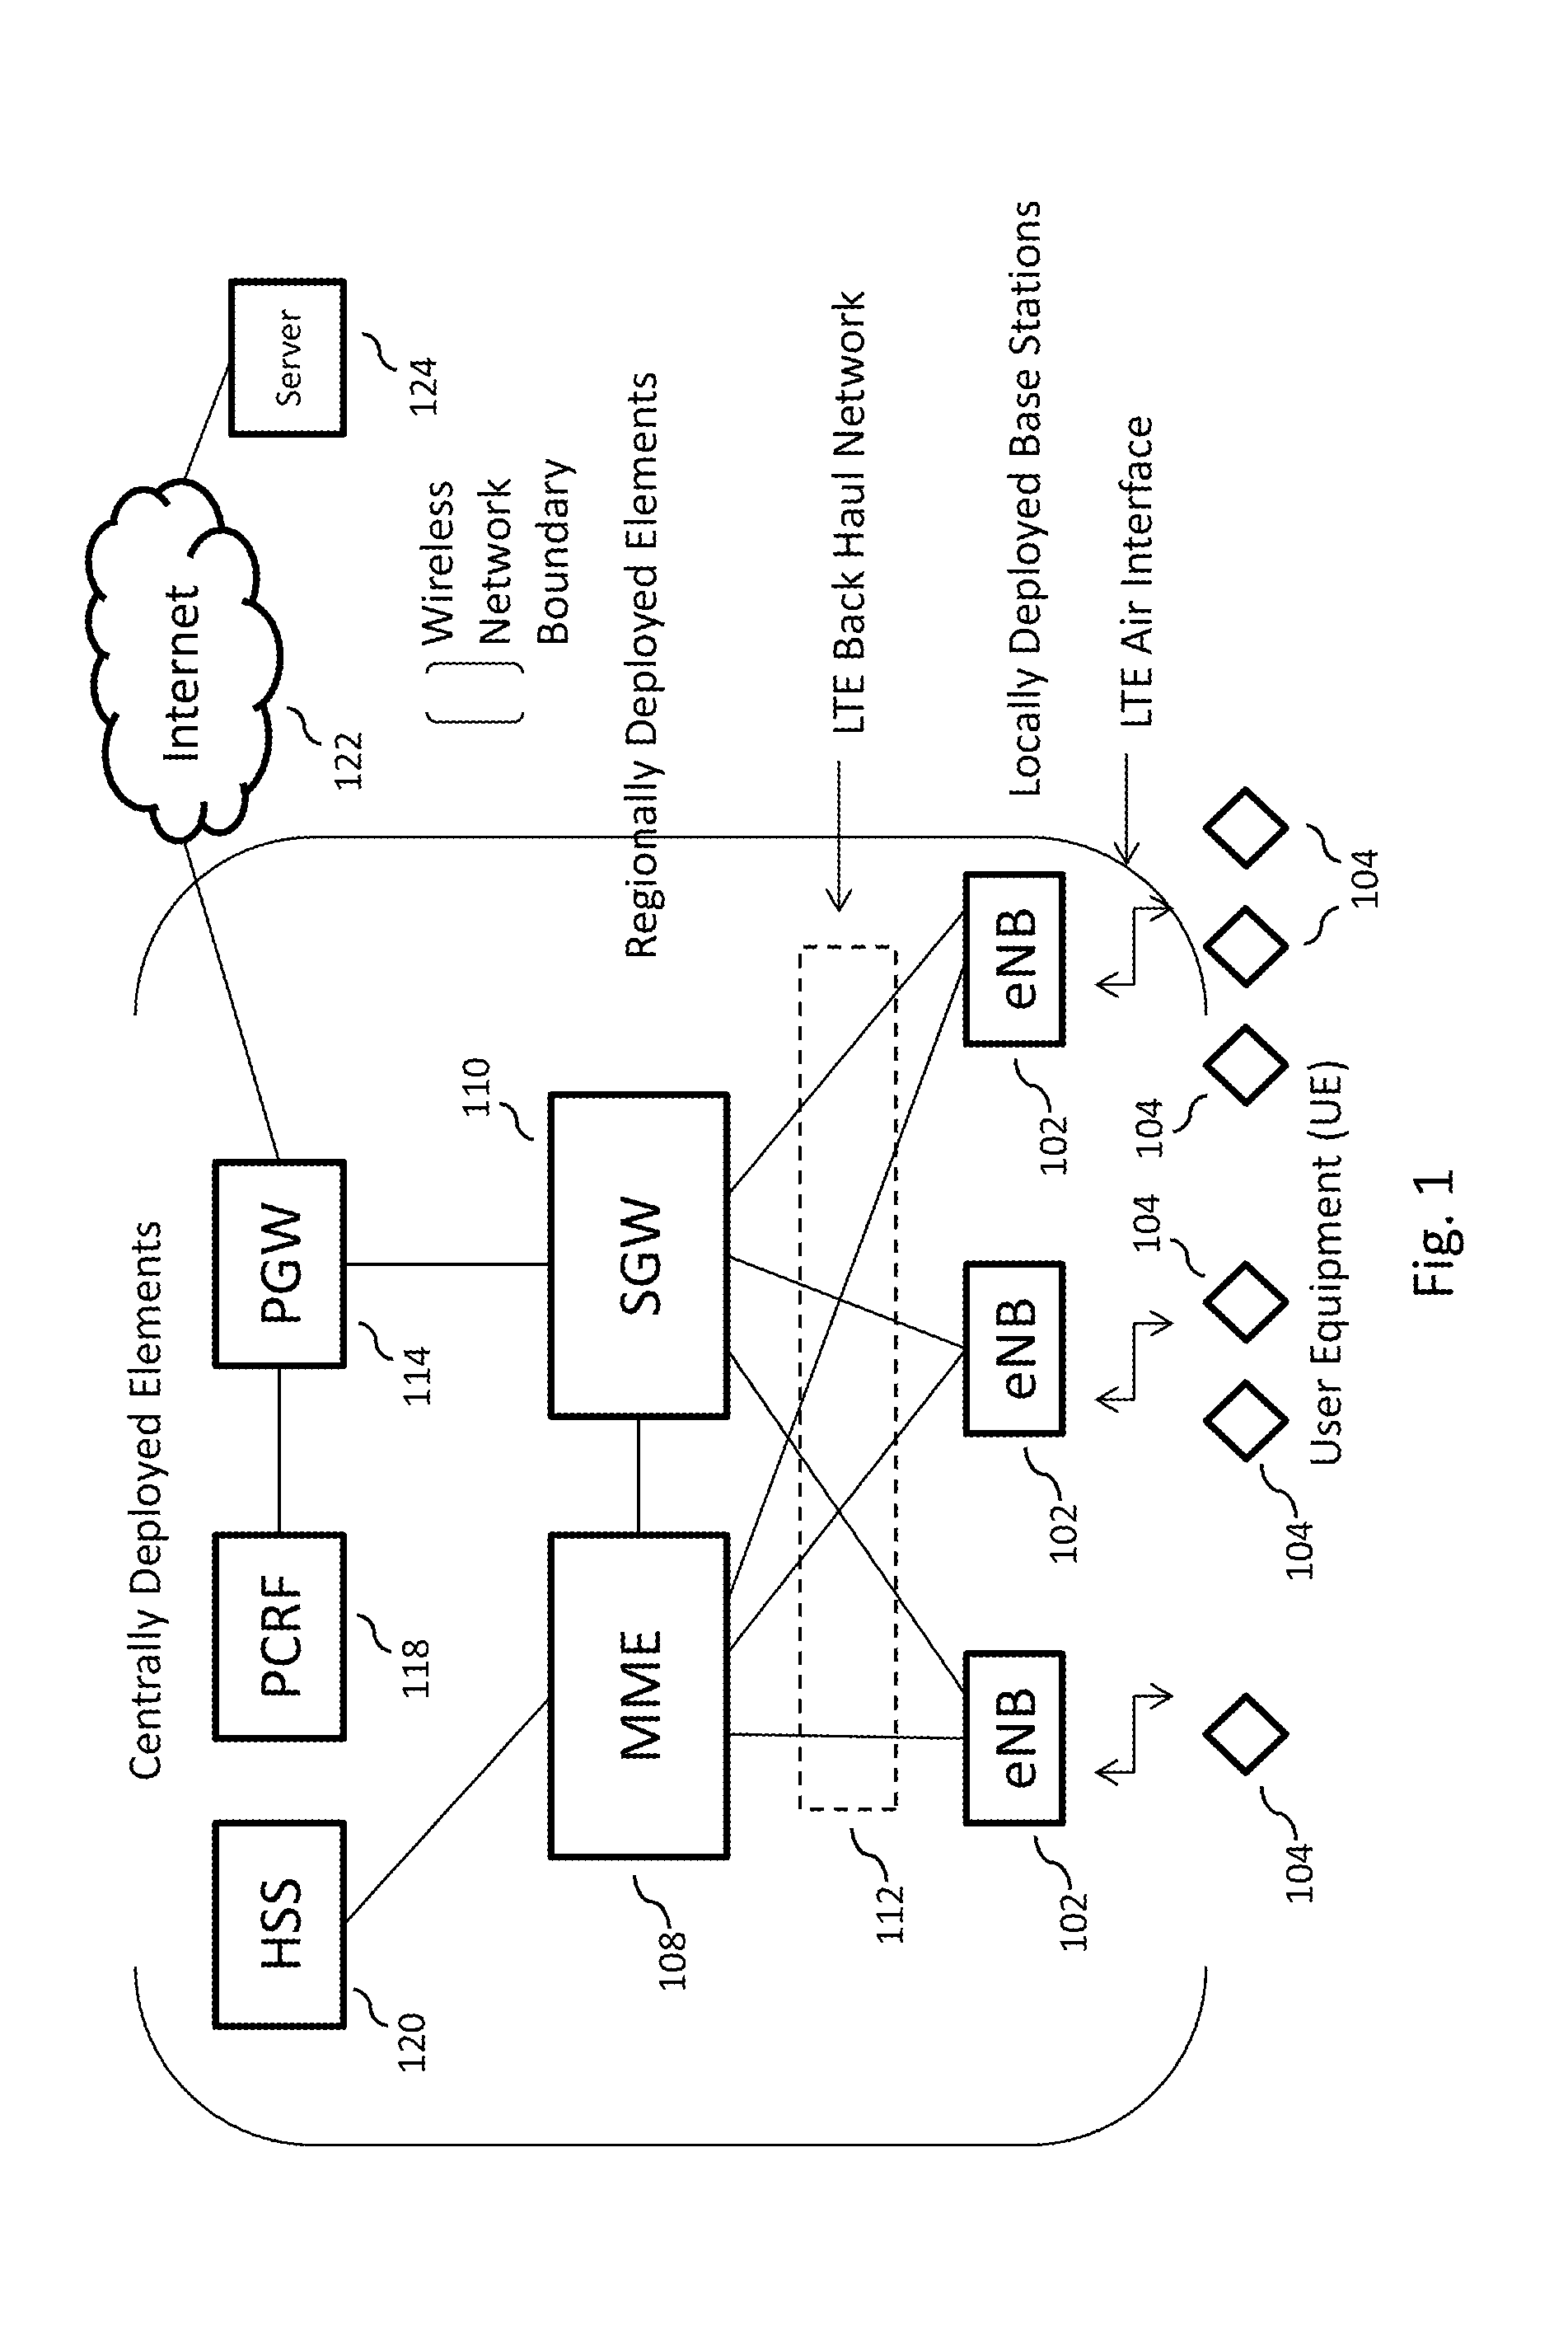 Efficient delivery of real-time asynchronous services over a wireless network